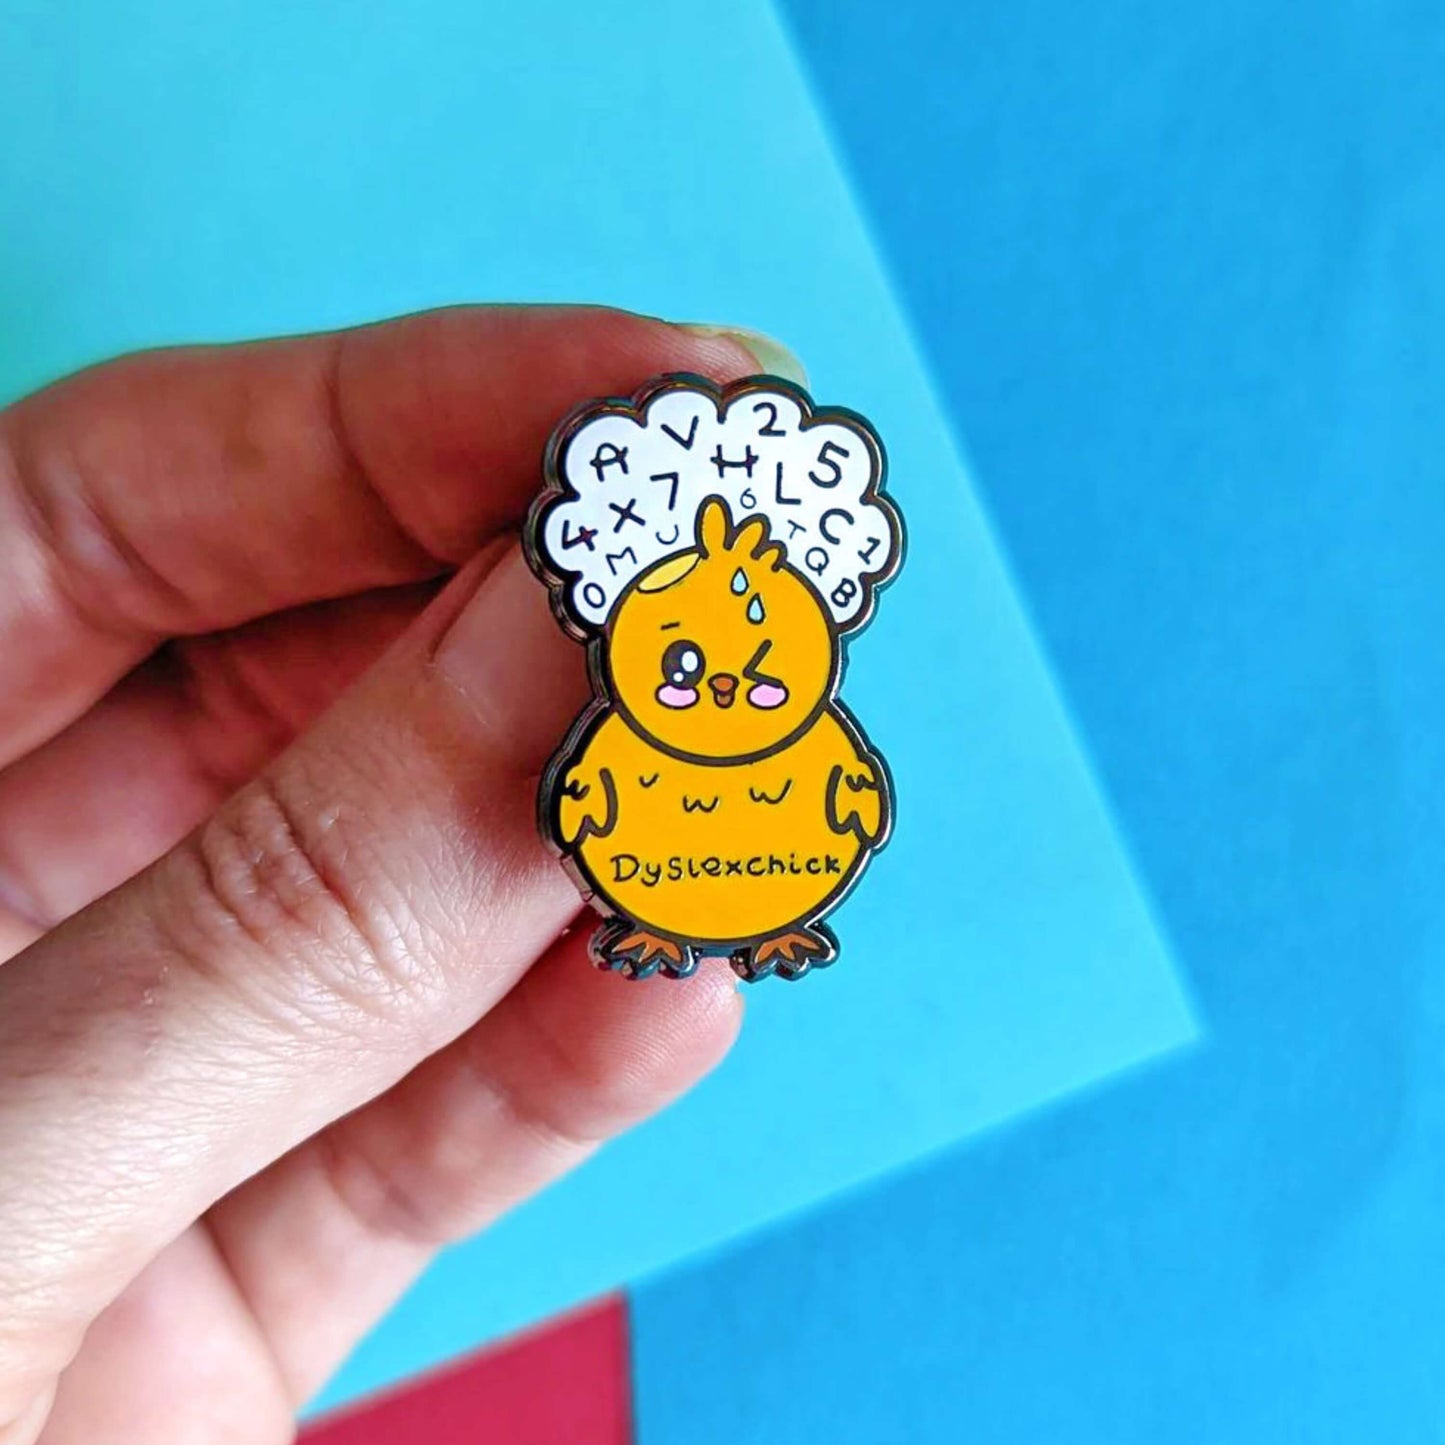 The Dyslexchick Enamel Pin - Dyslexia being held over a red and blue background. A yellow confused chick shaped pin badge with a thought bubble above its head full of letters and numbers with 'dyslexchick' written across its middle. The hand drawn design is raising awareness for dyslexia.